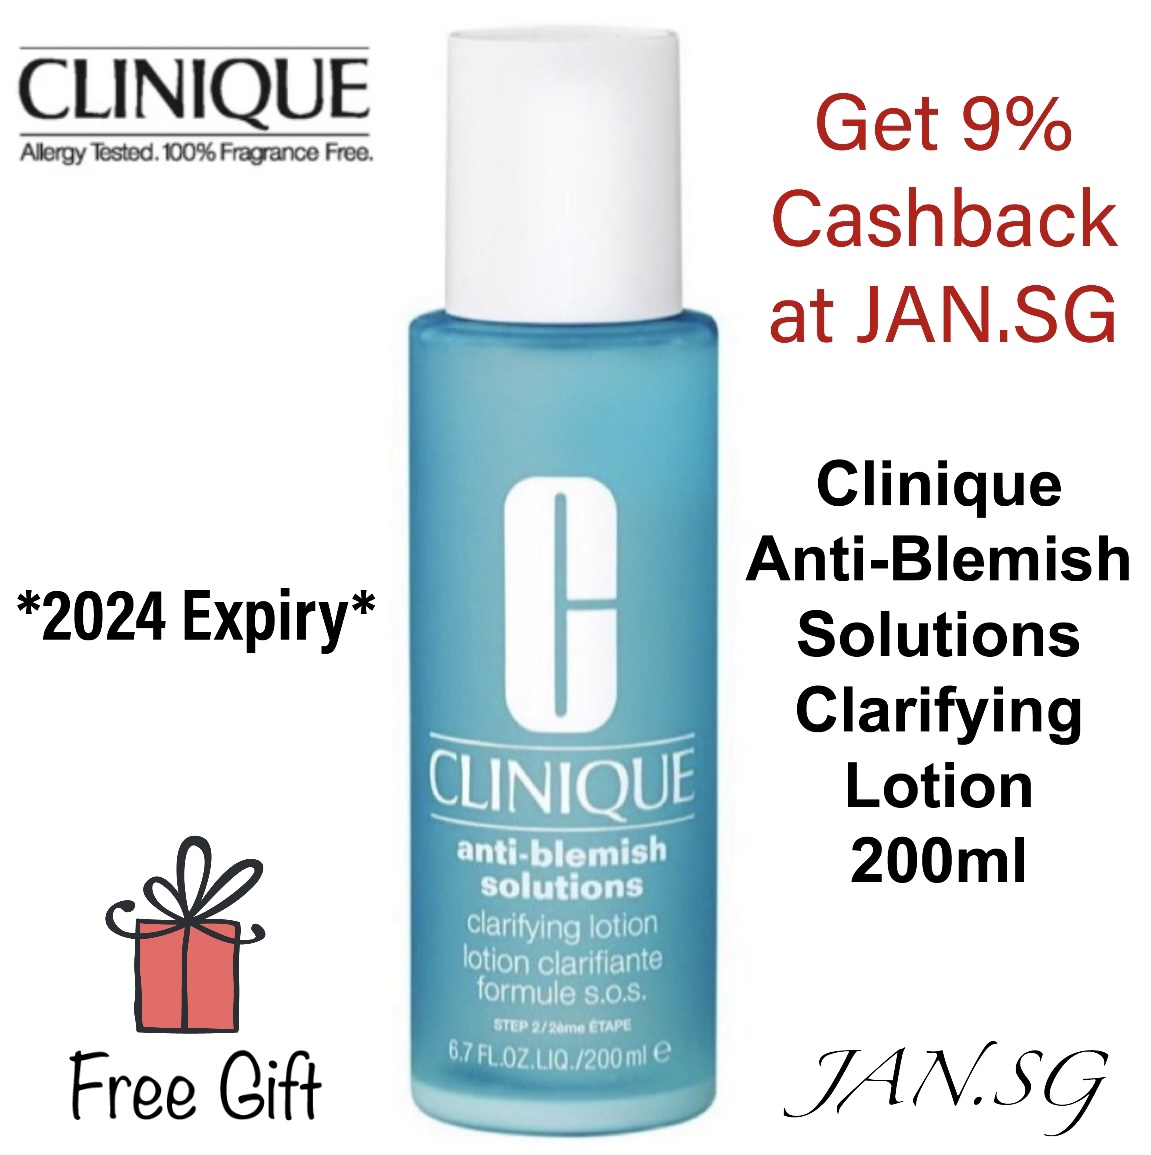 kanal råolie økse ❤️Clinique Anti Blemish❤️ *2024 EXPIRY STOCKS* Clinique Anti-Blemish  Solutions Clarifying Lotion 200ml - For Oily and Acne-Prone Skin Type, Acne  Care, Pore Control, Clinique Anti Blemish, Clinique Clarifying Lotion, Clarifying  Lotion Clinique 